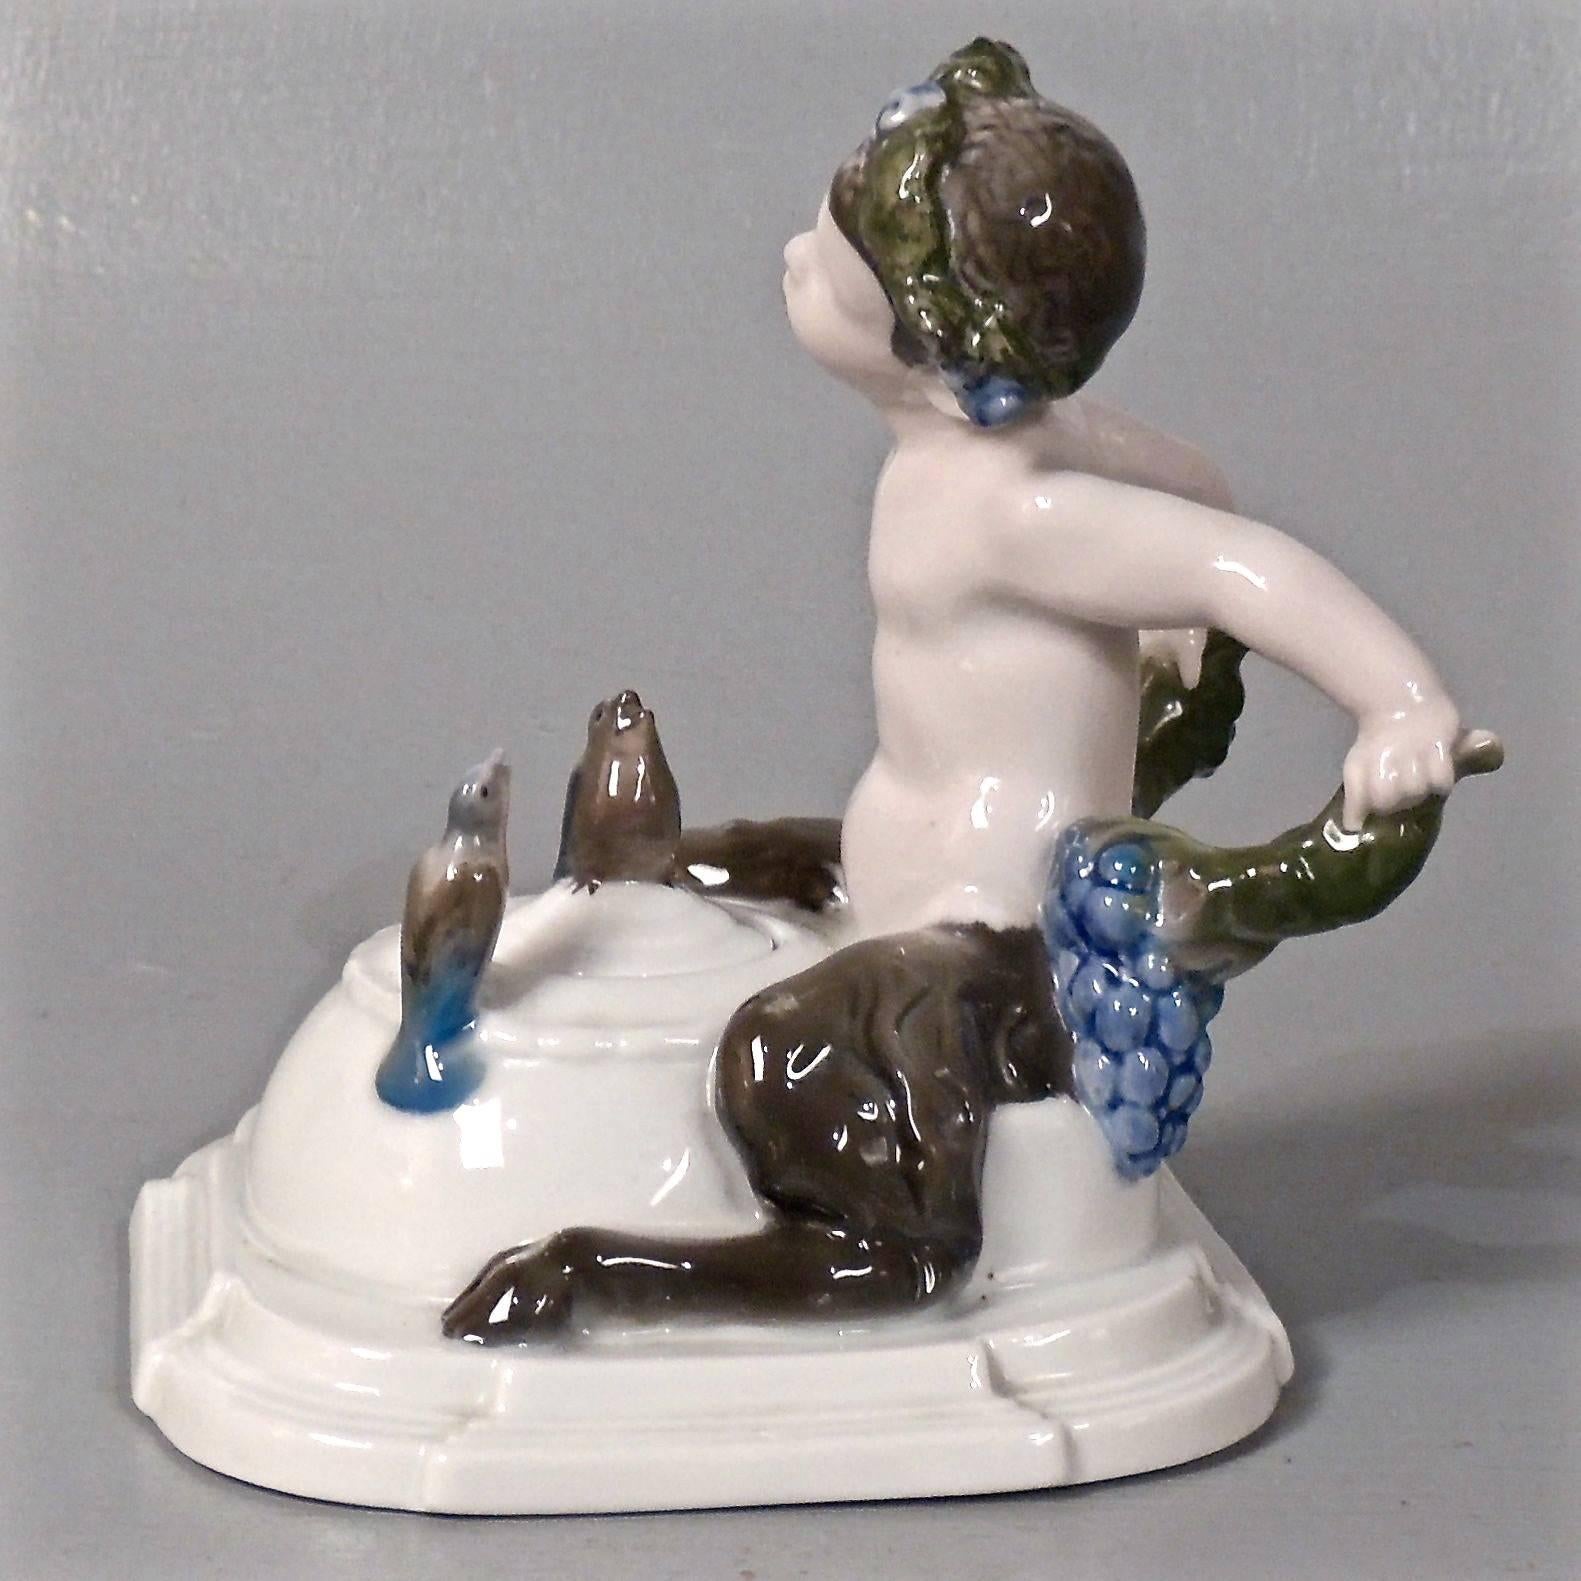 A rare figural Rosenthal porcelain inkwell entitled Symphonie.

The inkwell is modeled in the form of a young faun sitting astride the inkwell body and bending his ear to listen the symphony of the songbirds, which are perched atop both the lid